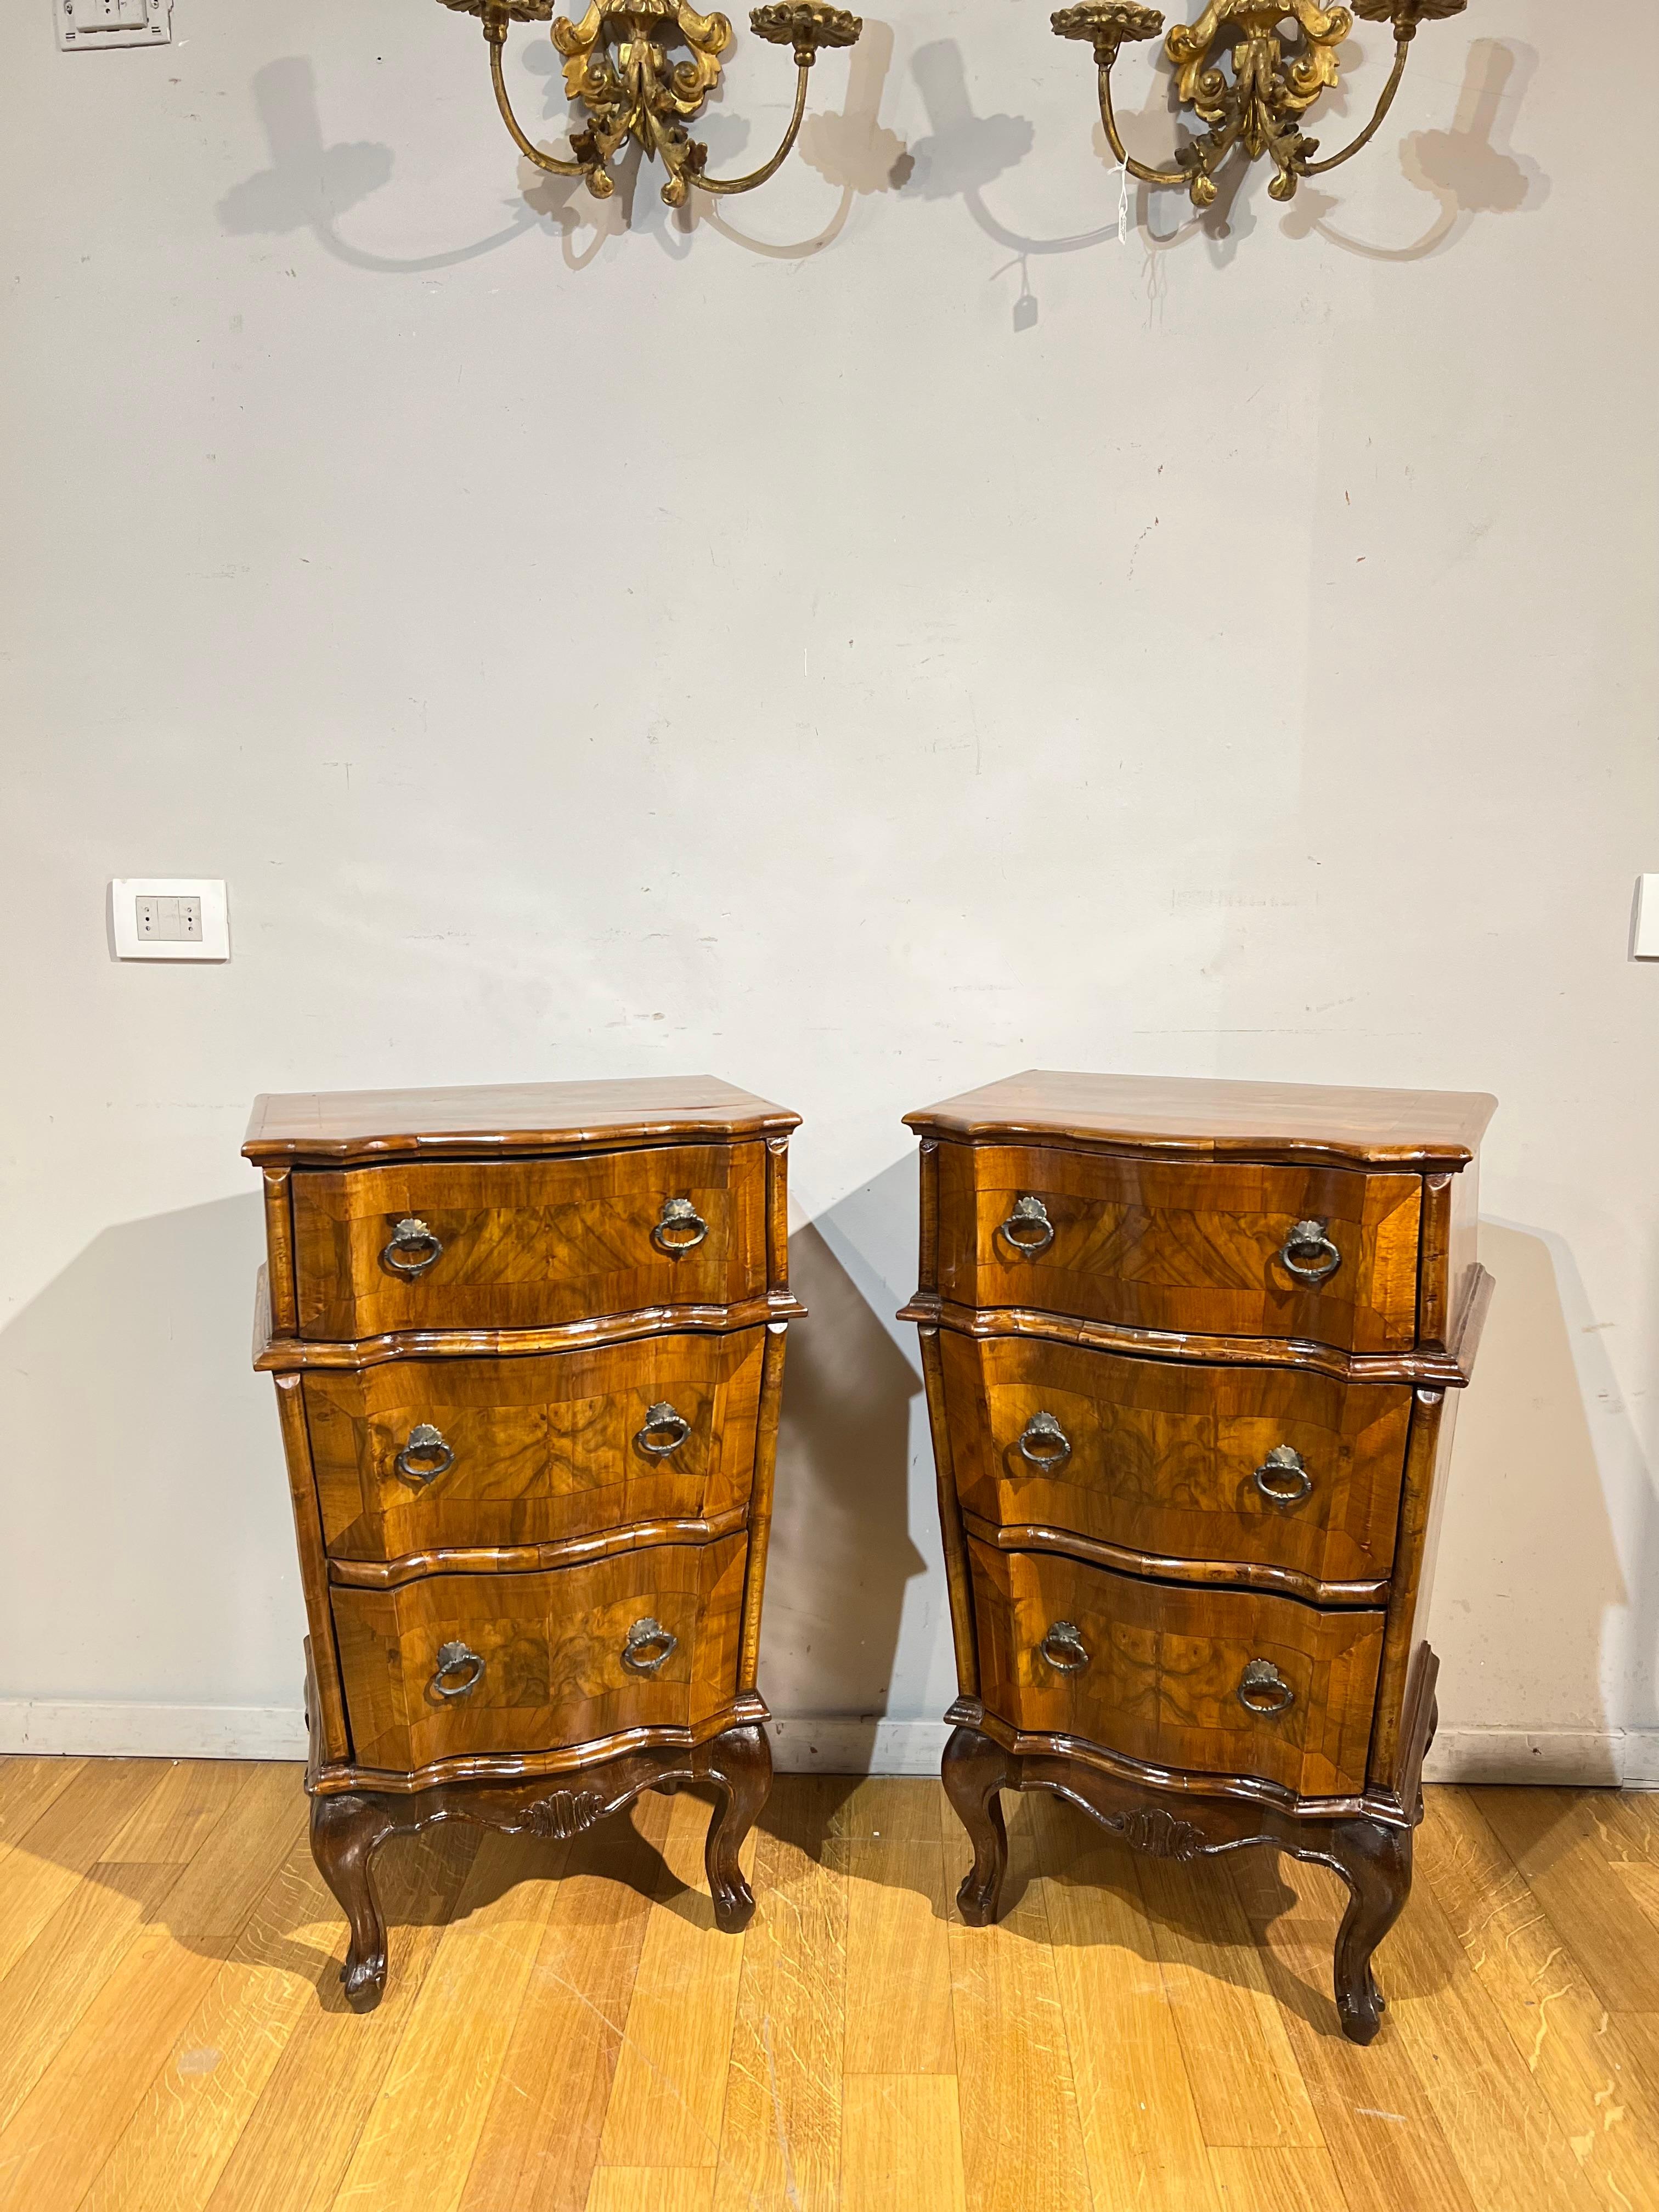 Beautiful pair of bedside tables in walnut briar veneer with solid walnut profiles and fir interiors, three full-body drawers on a solid walnut base. Wavy legs, small pendant centered by a shell carving.
Lombard-Venetian manufacture of the